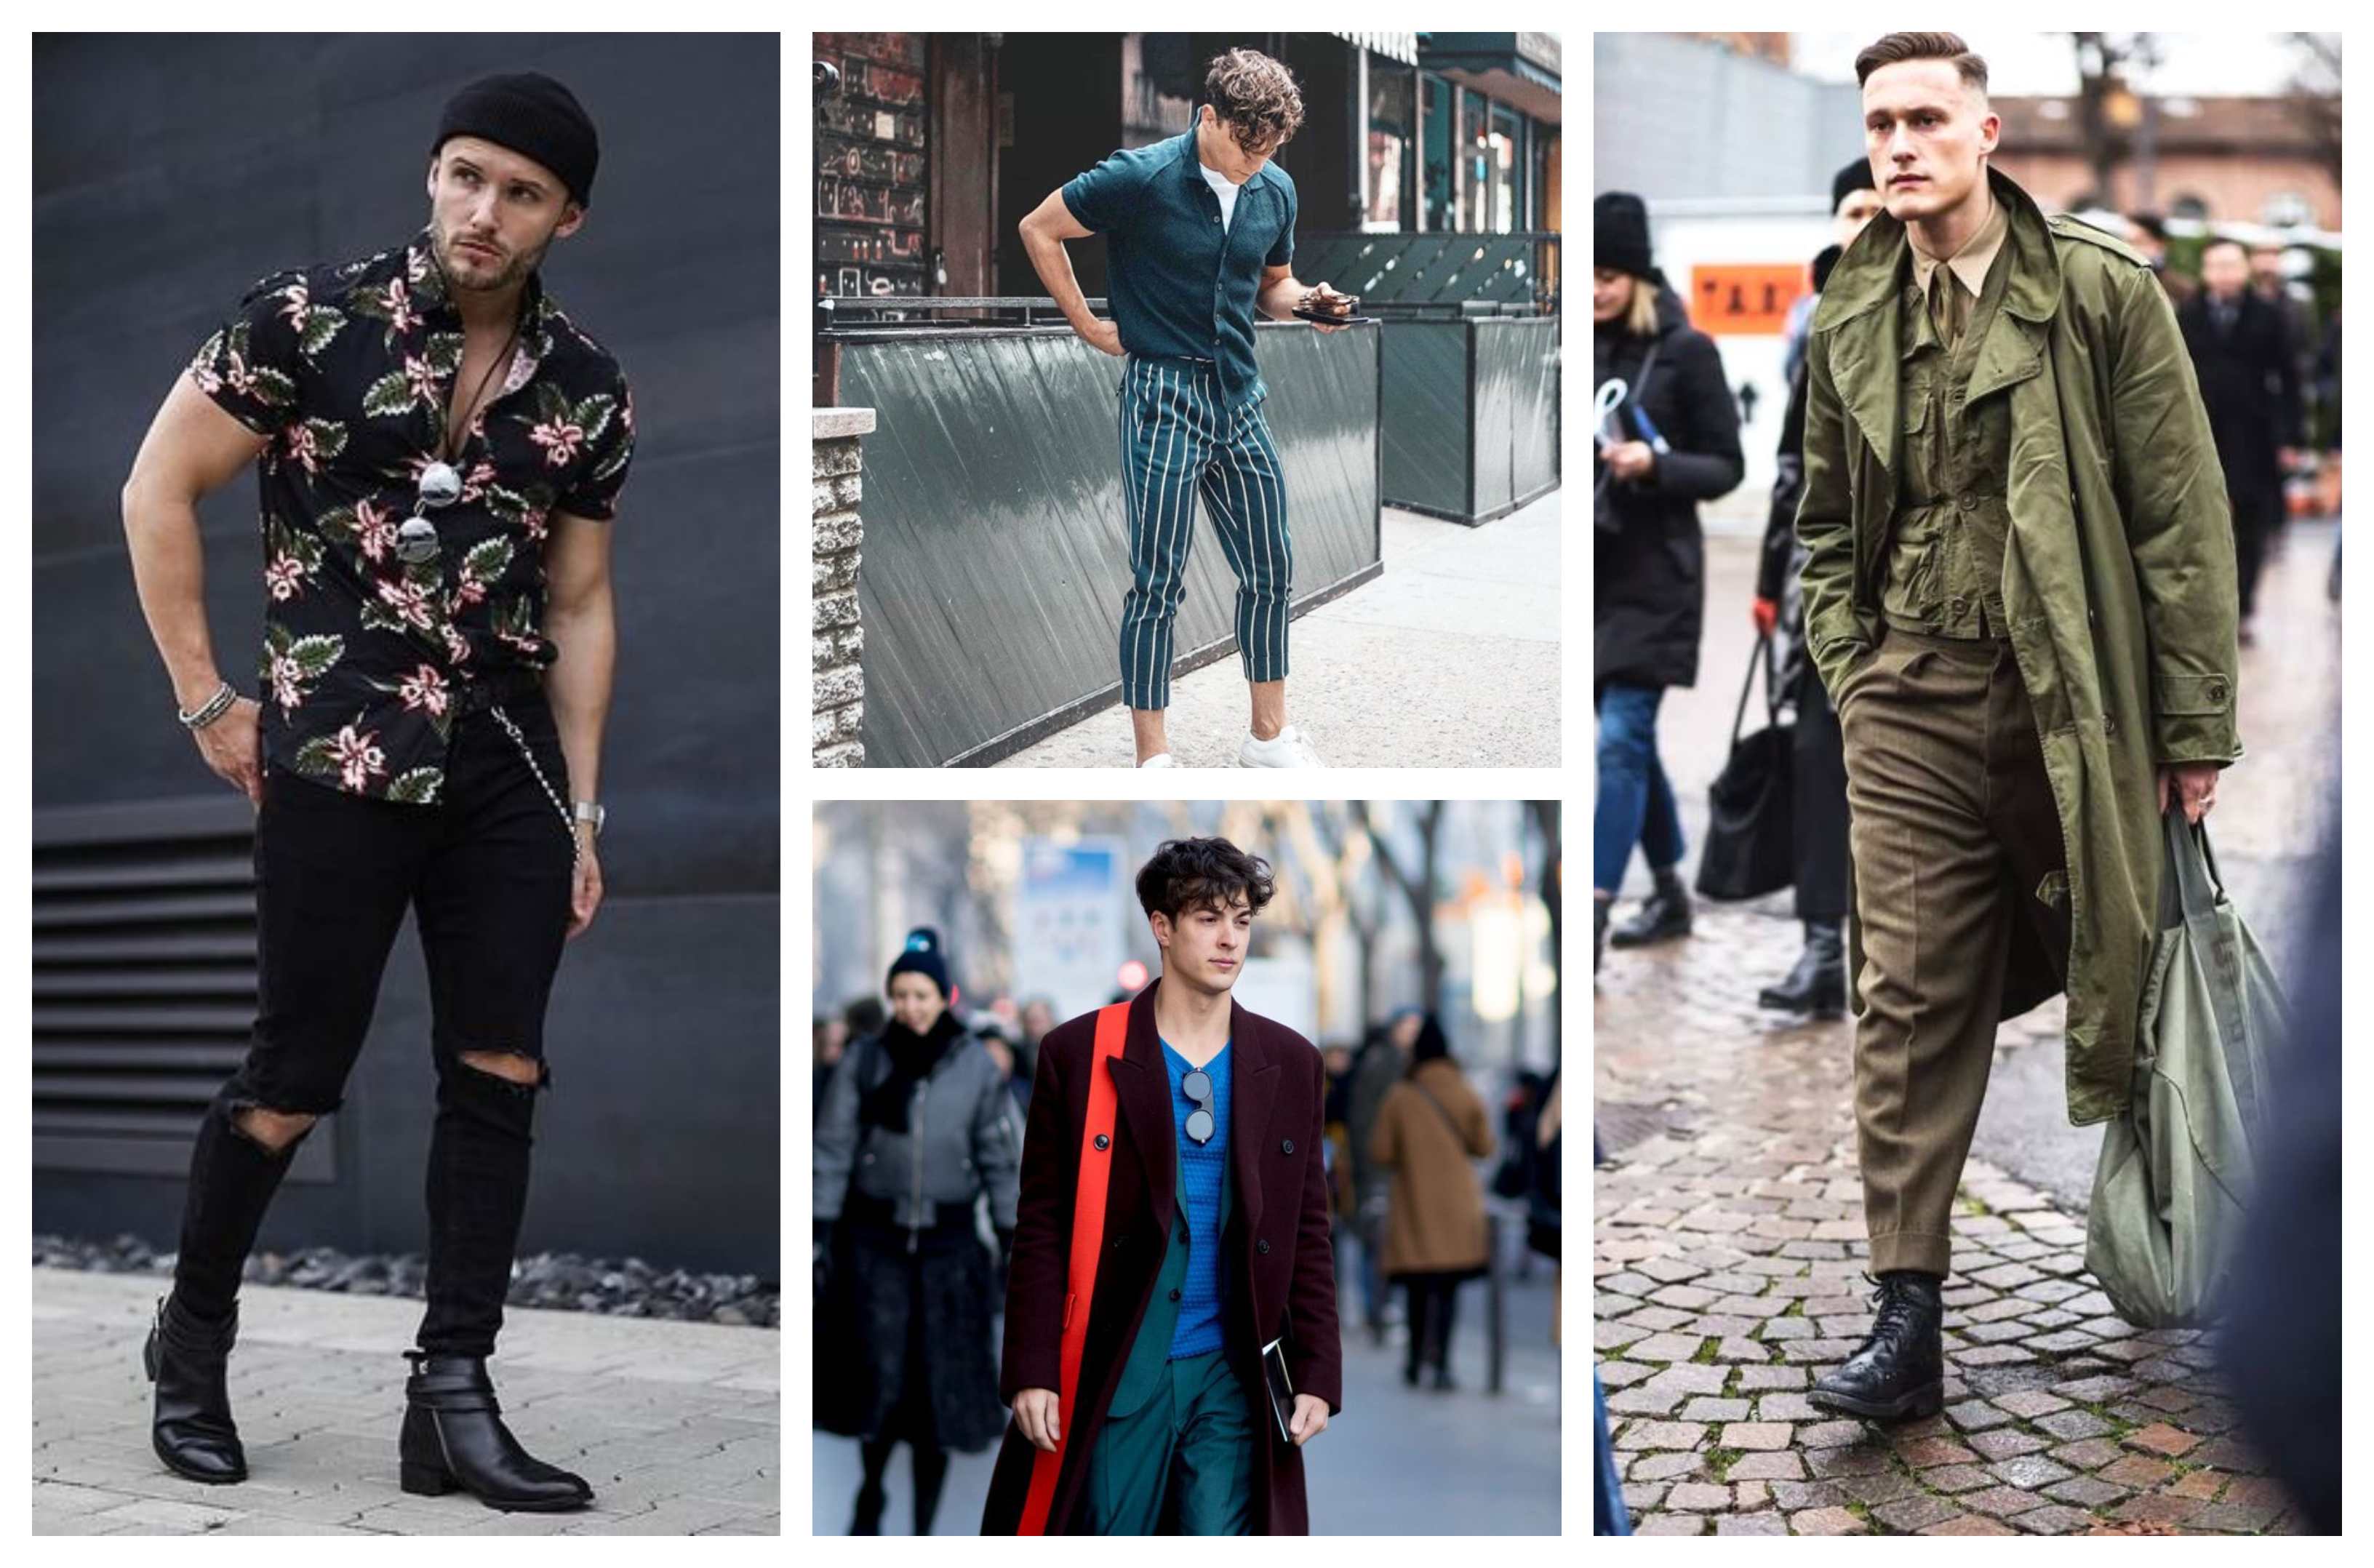 Top 10 Street Style Trends for Men